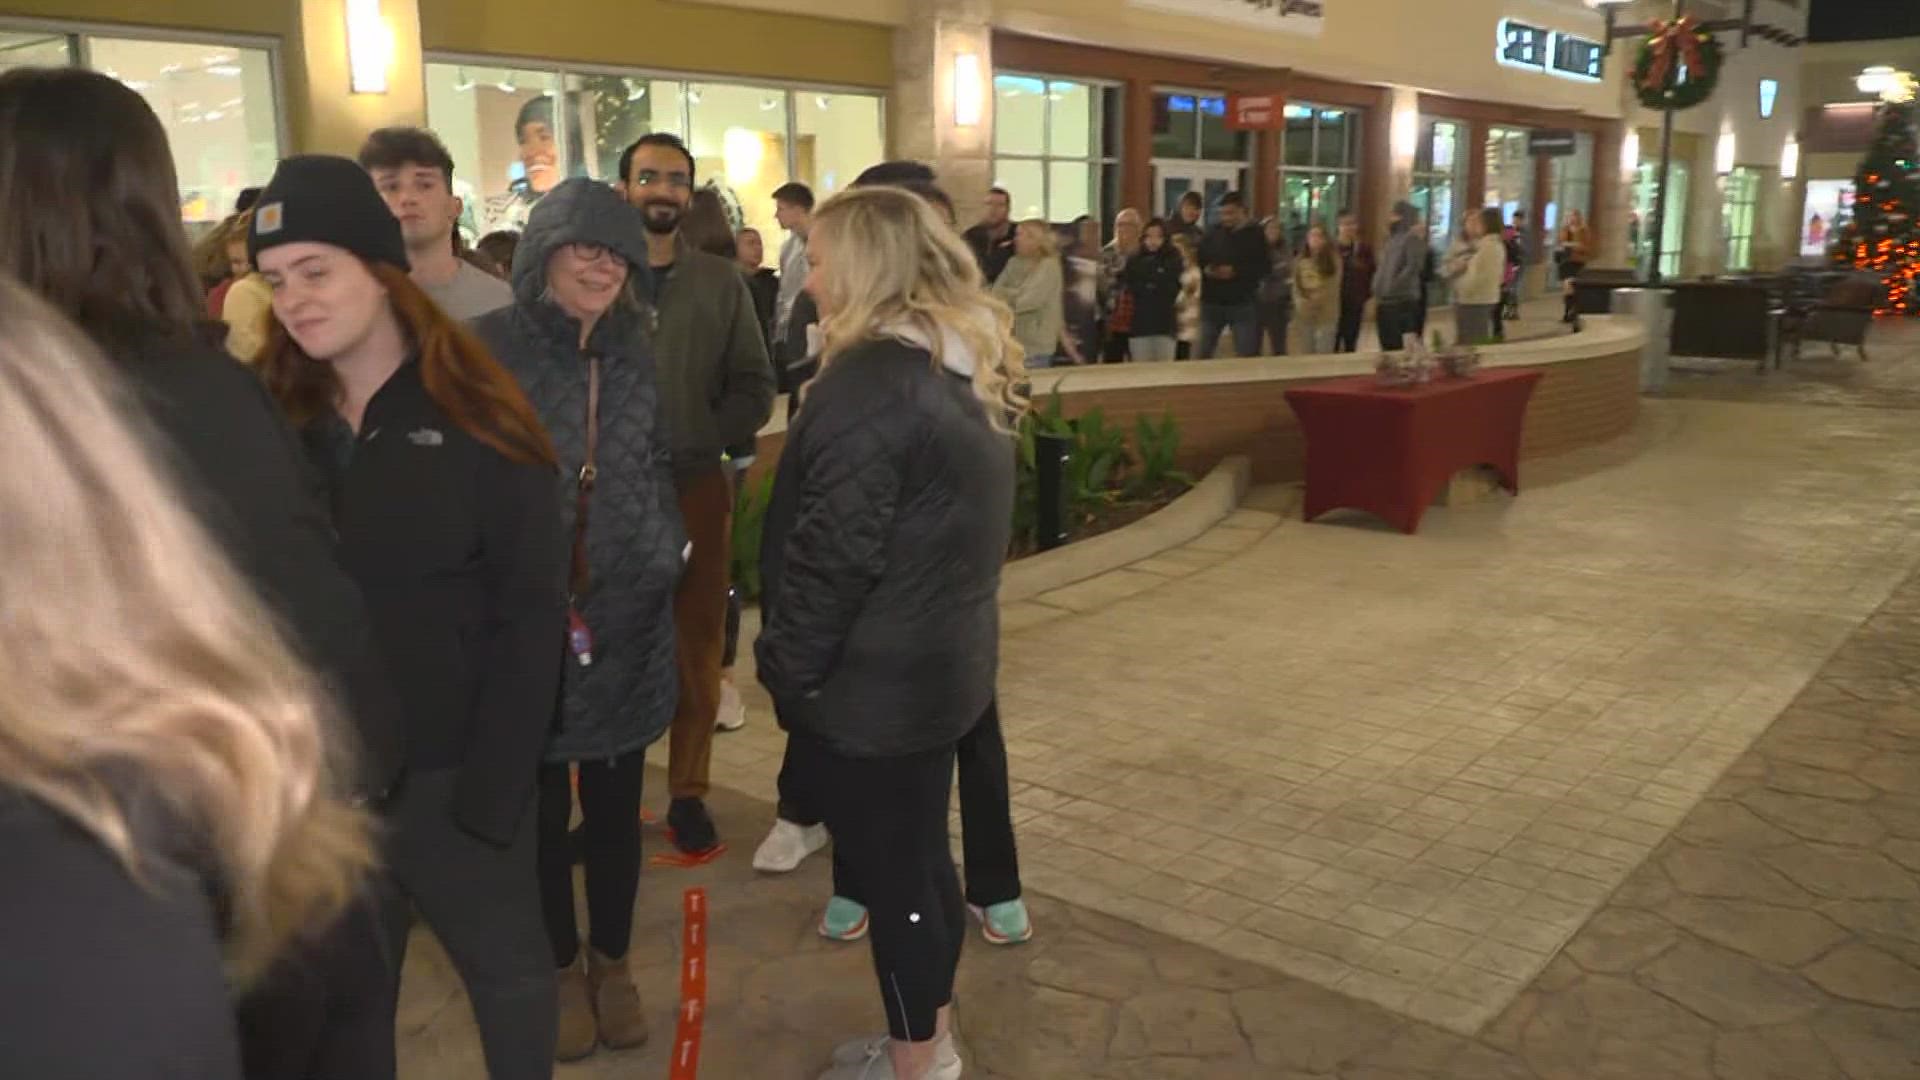 Lines started early outside stores at the Tanger Outlets, but it looks like WFAA's Susanne Brunner made it earlier to grab some deals!